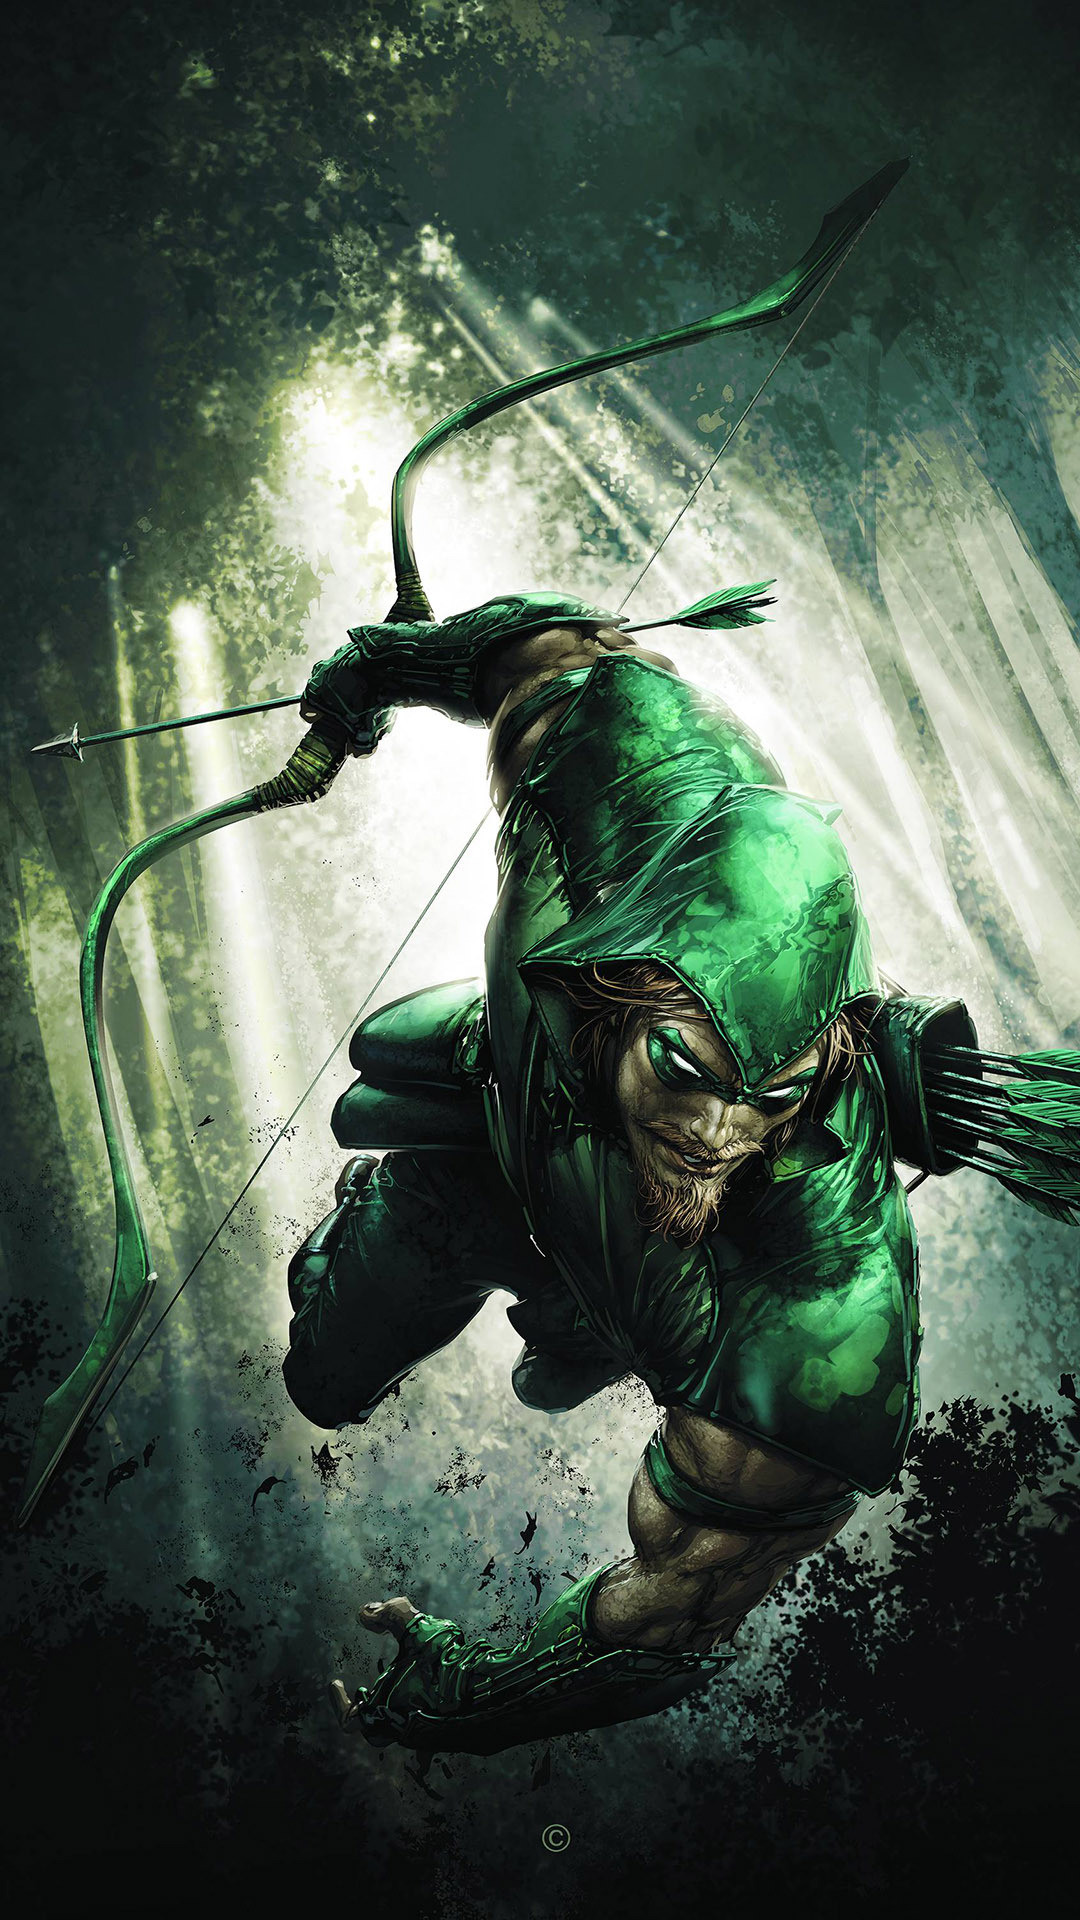 1080x1920 ... green arrow 870151 walldevil; arrow wallpapers for iphone 7 iphone 7  plus iphone 6 plus ...